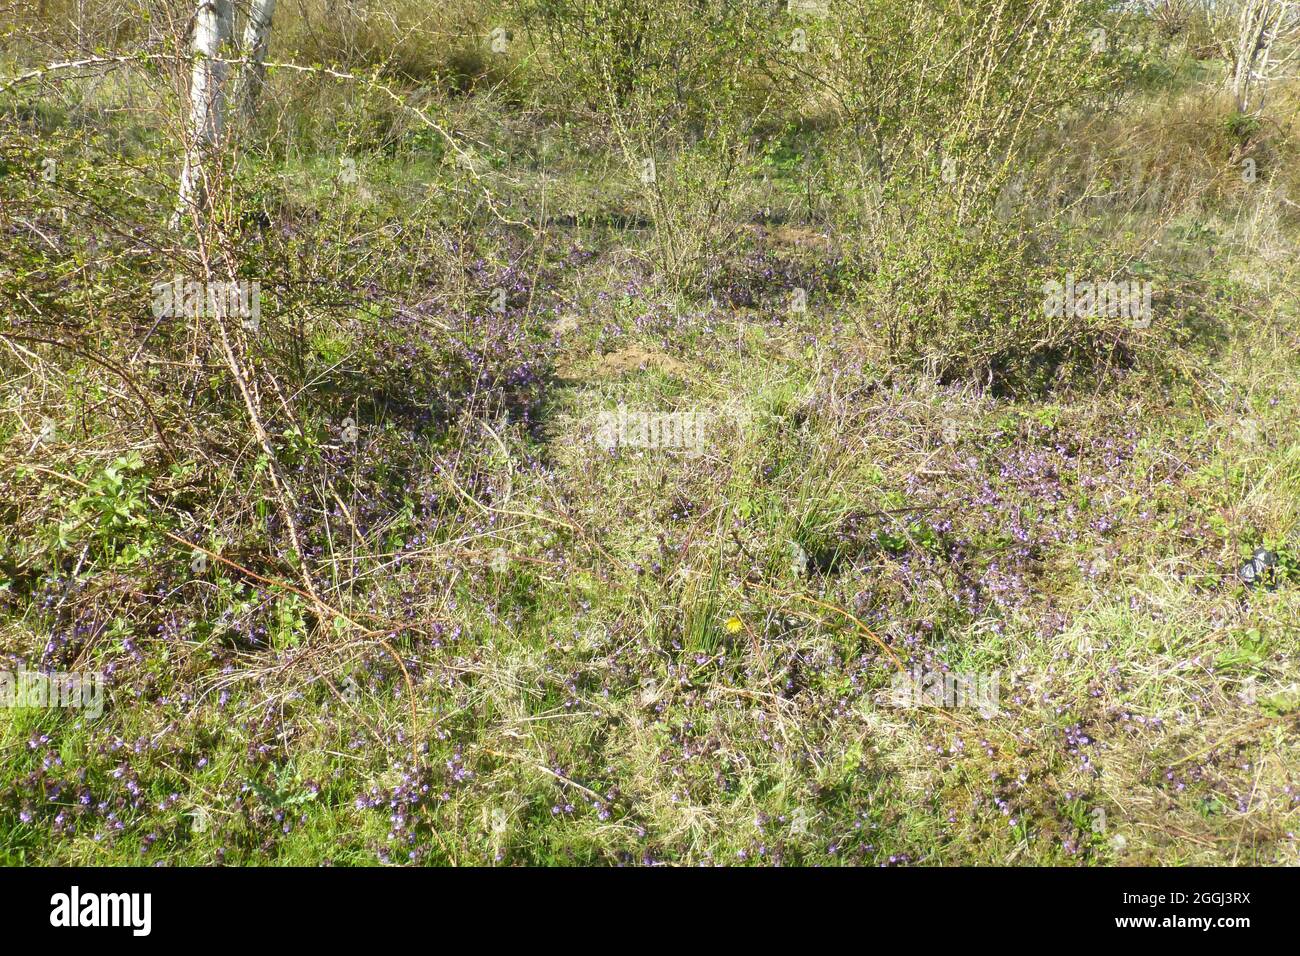 Summer Leys Northamptonshire grass plants plant green outside planting growth nature trail beautiful insects green view views Stock Photo